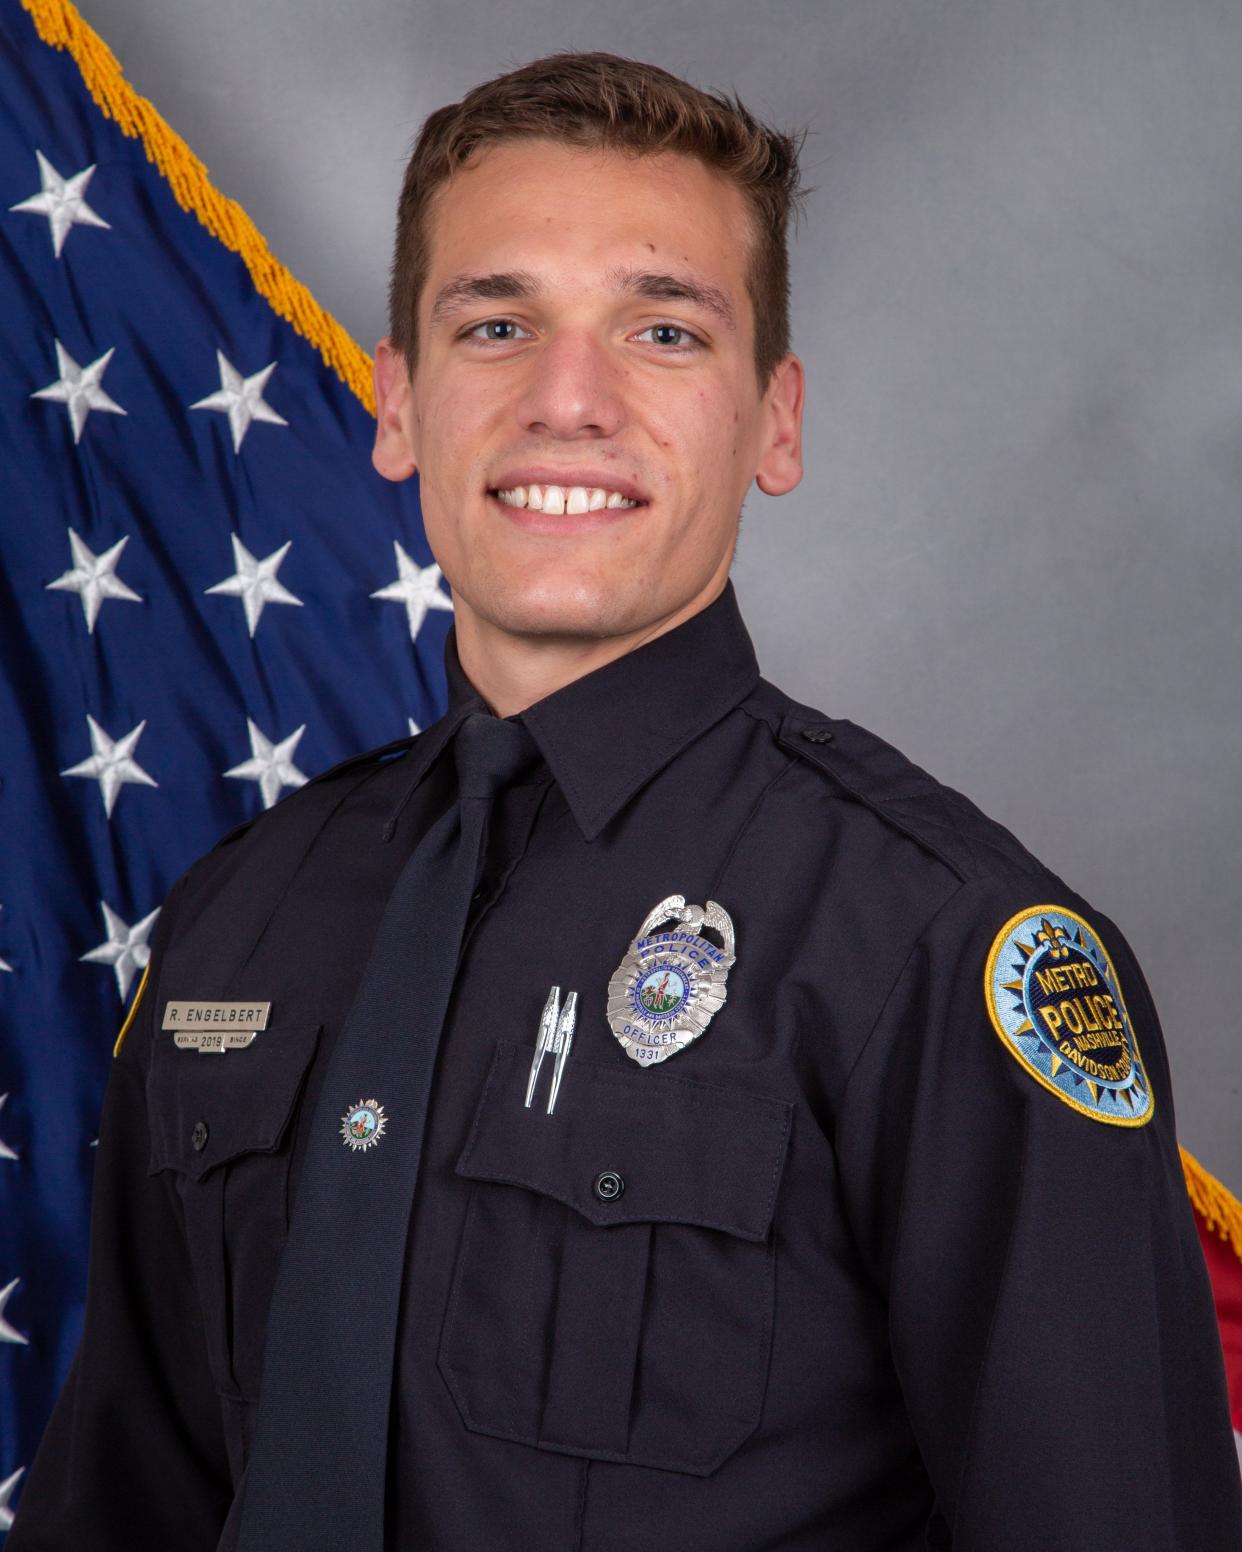 Officer Rex Engelbert, a 4-year veteran of the Metro Nashville Police Department, was one of two officers who fired fatal shots at the Covenant School shooter Audrey Hale on March 27, 2023.